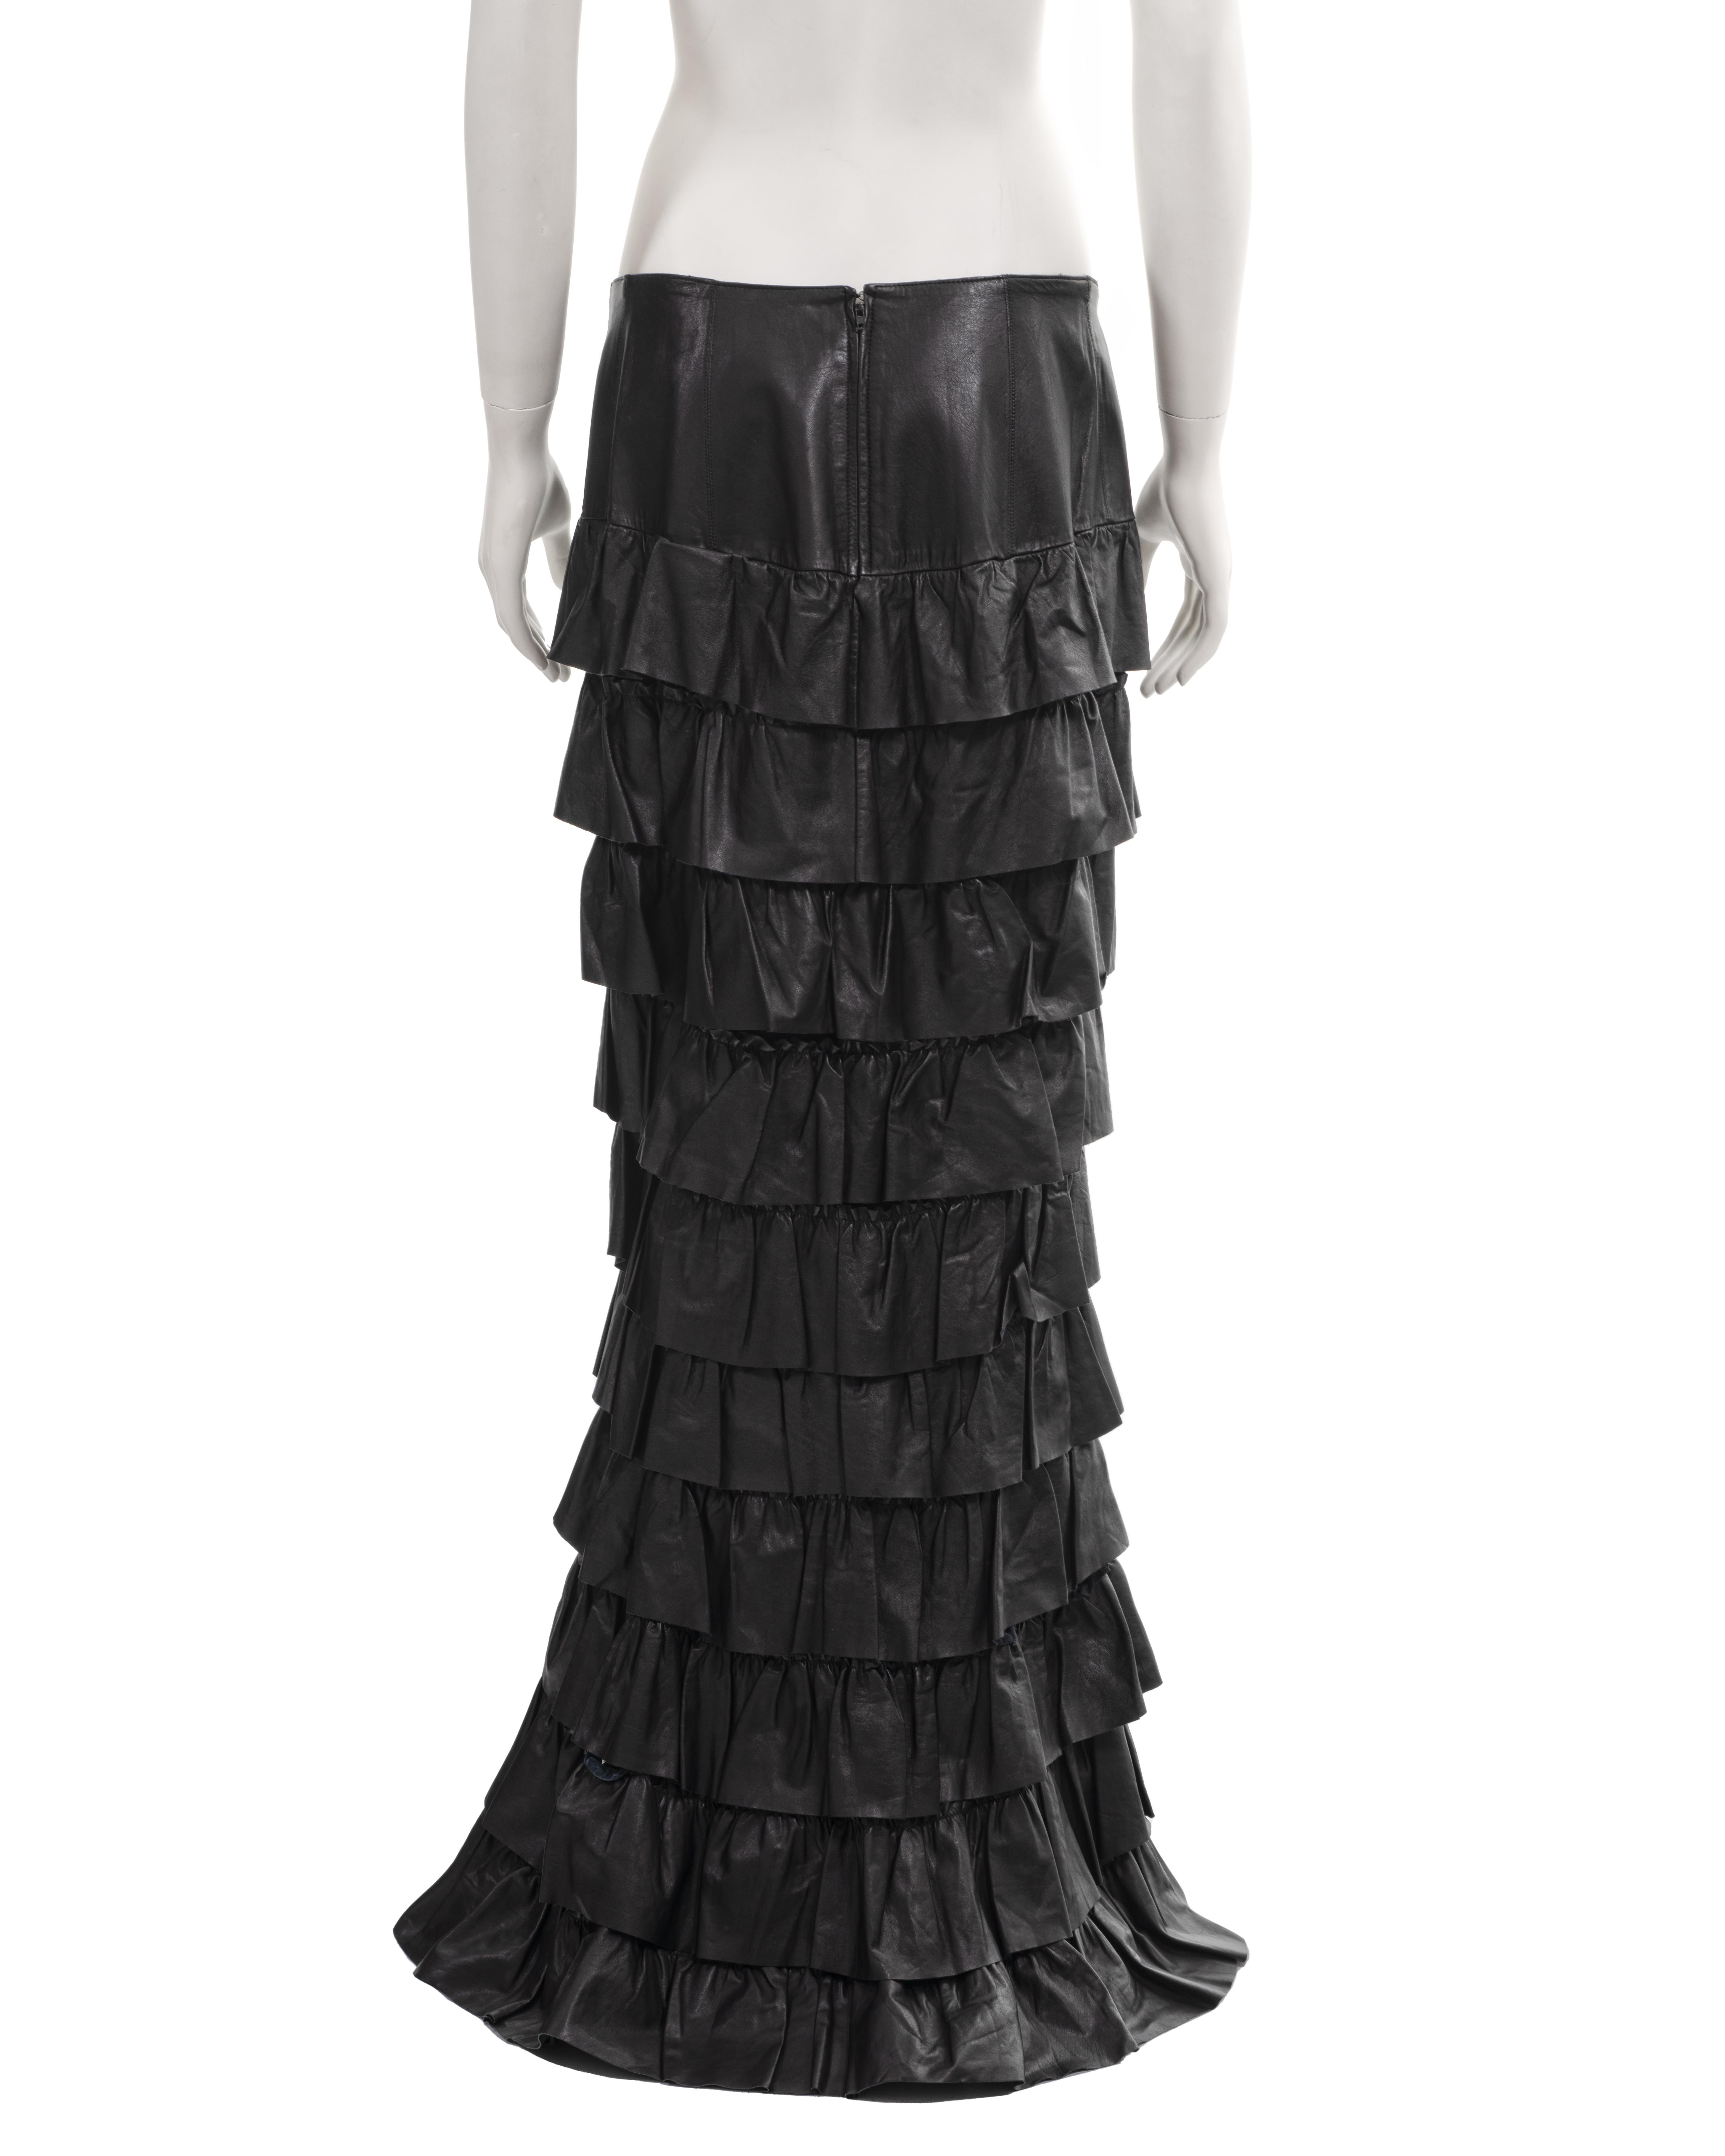 Chanel by Karl Lagerfeld black leather tiered ruffled maxi skirt, fw 2001 4